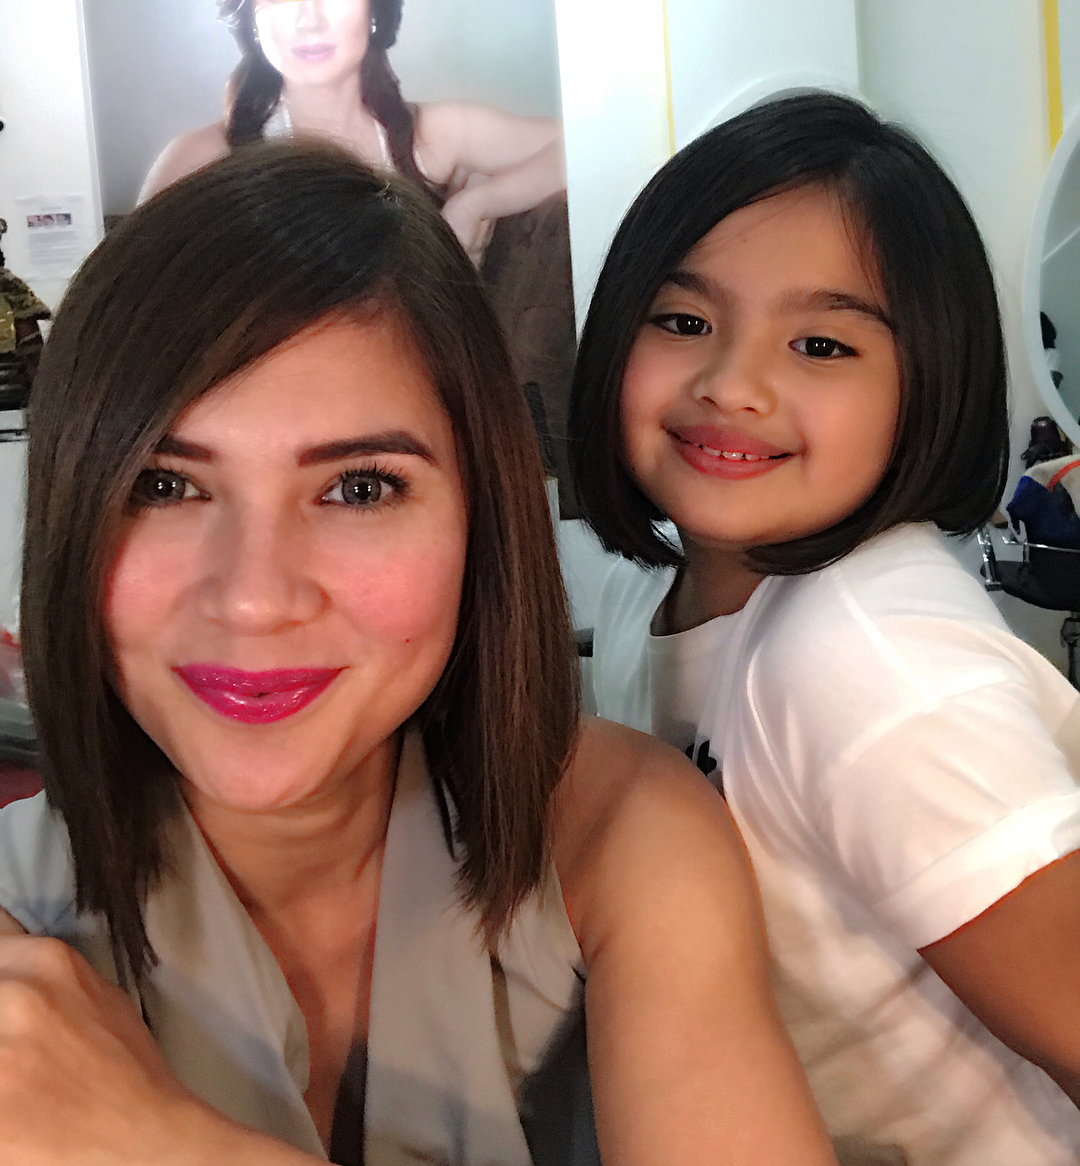 LOOK: Vina Morales shows off matching hairstyle with daughter Caena | Inqui...